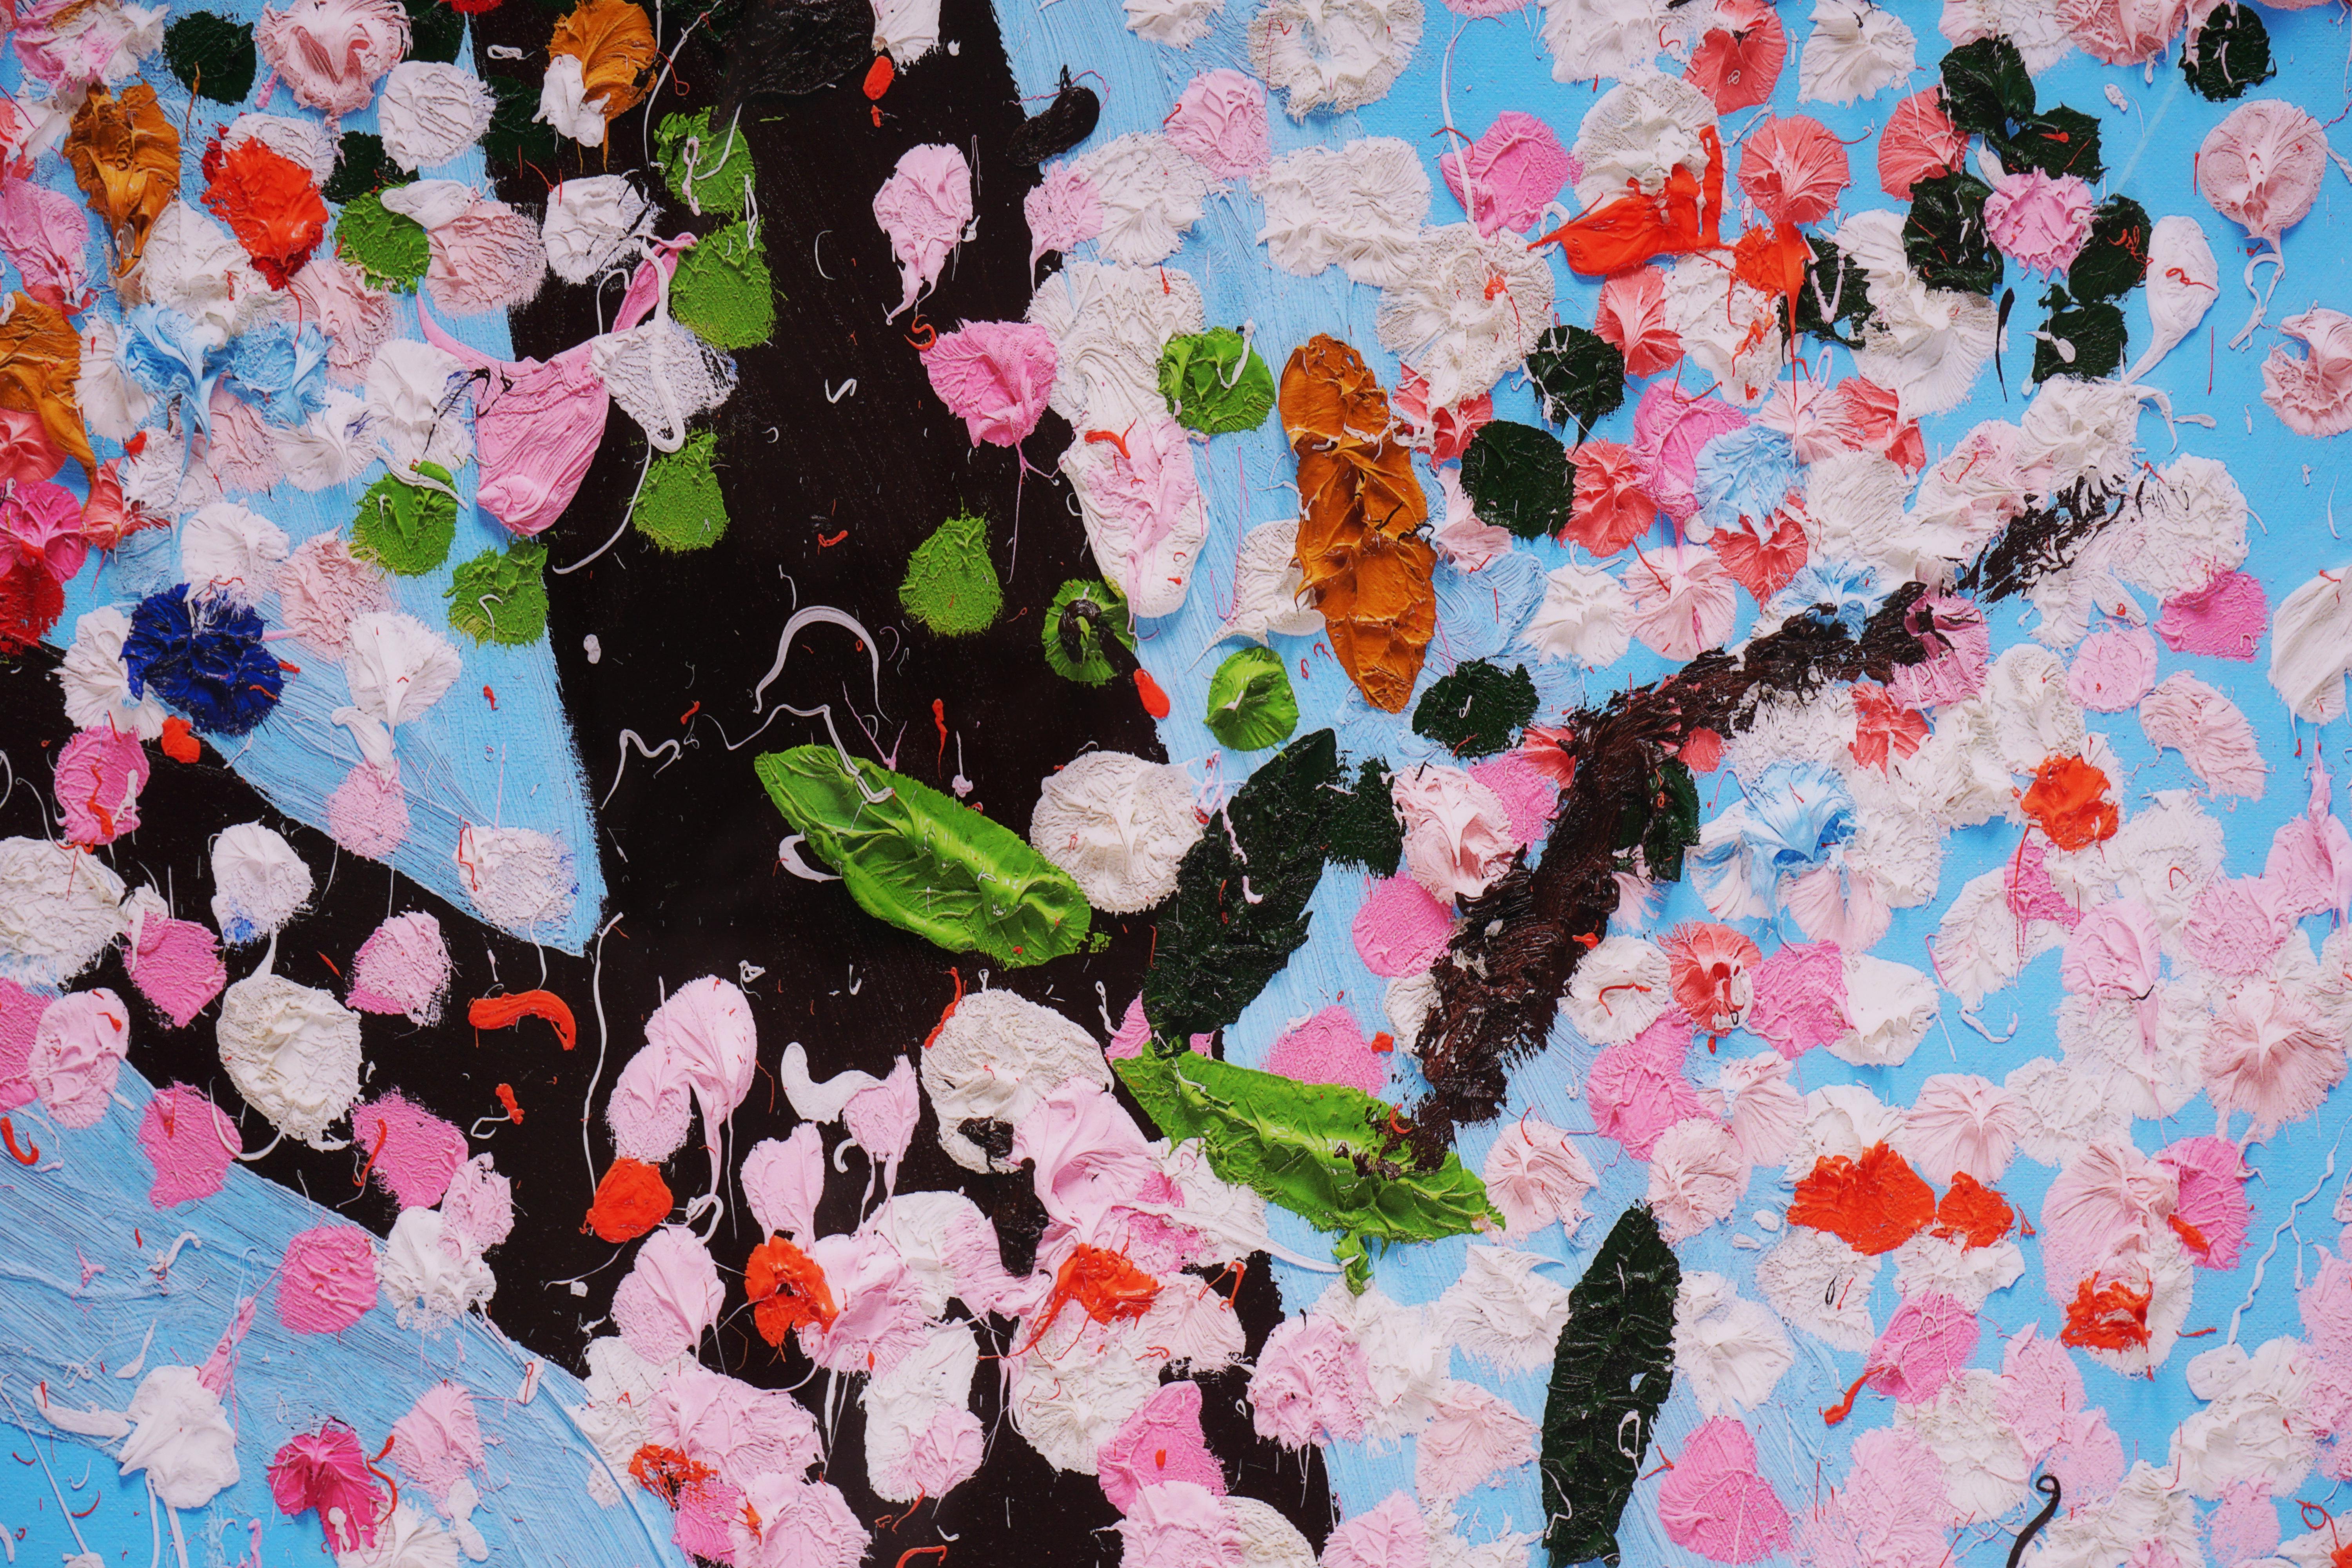 The Virtues 'Honour', Limited Edition 'Cherry Blossom' Landscape - Print by Damien Hirst